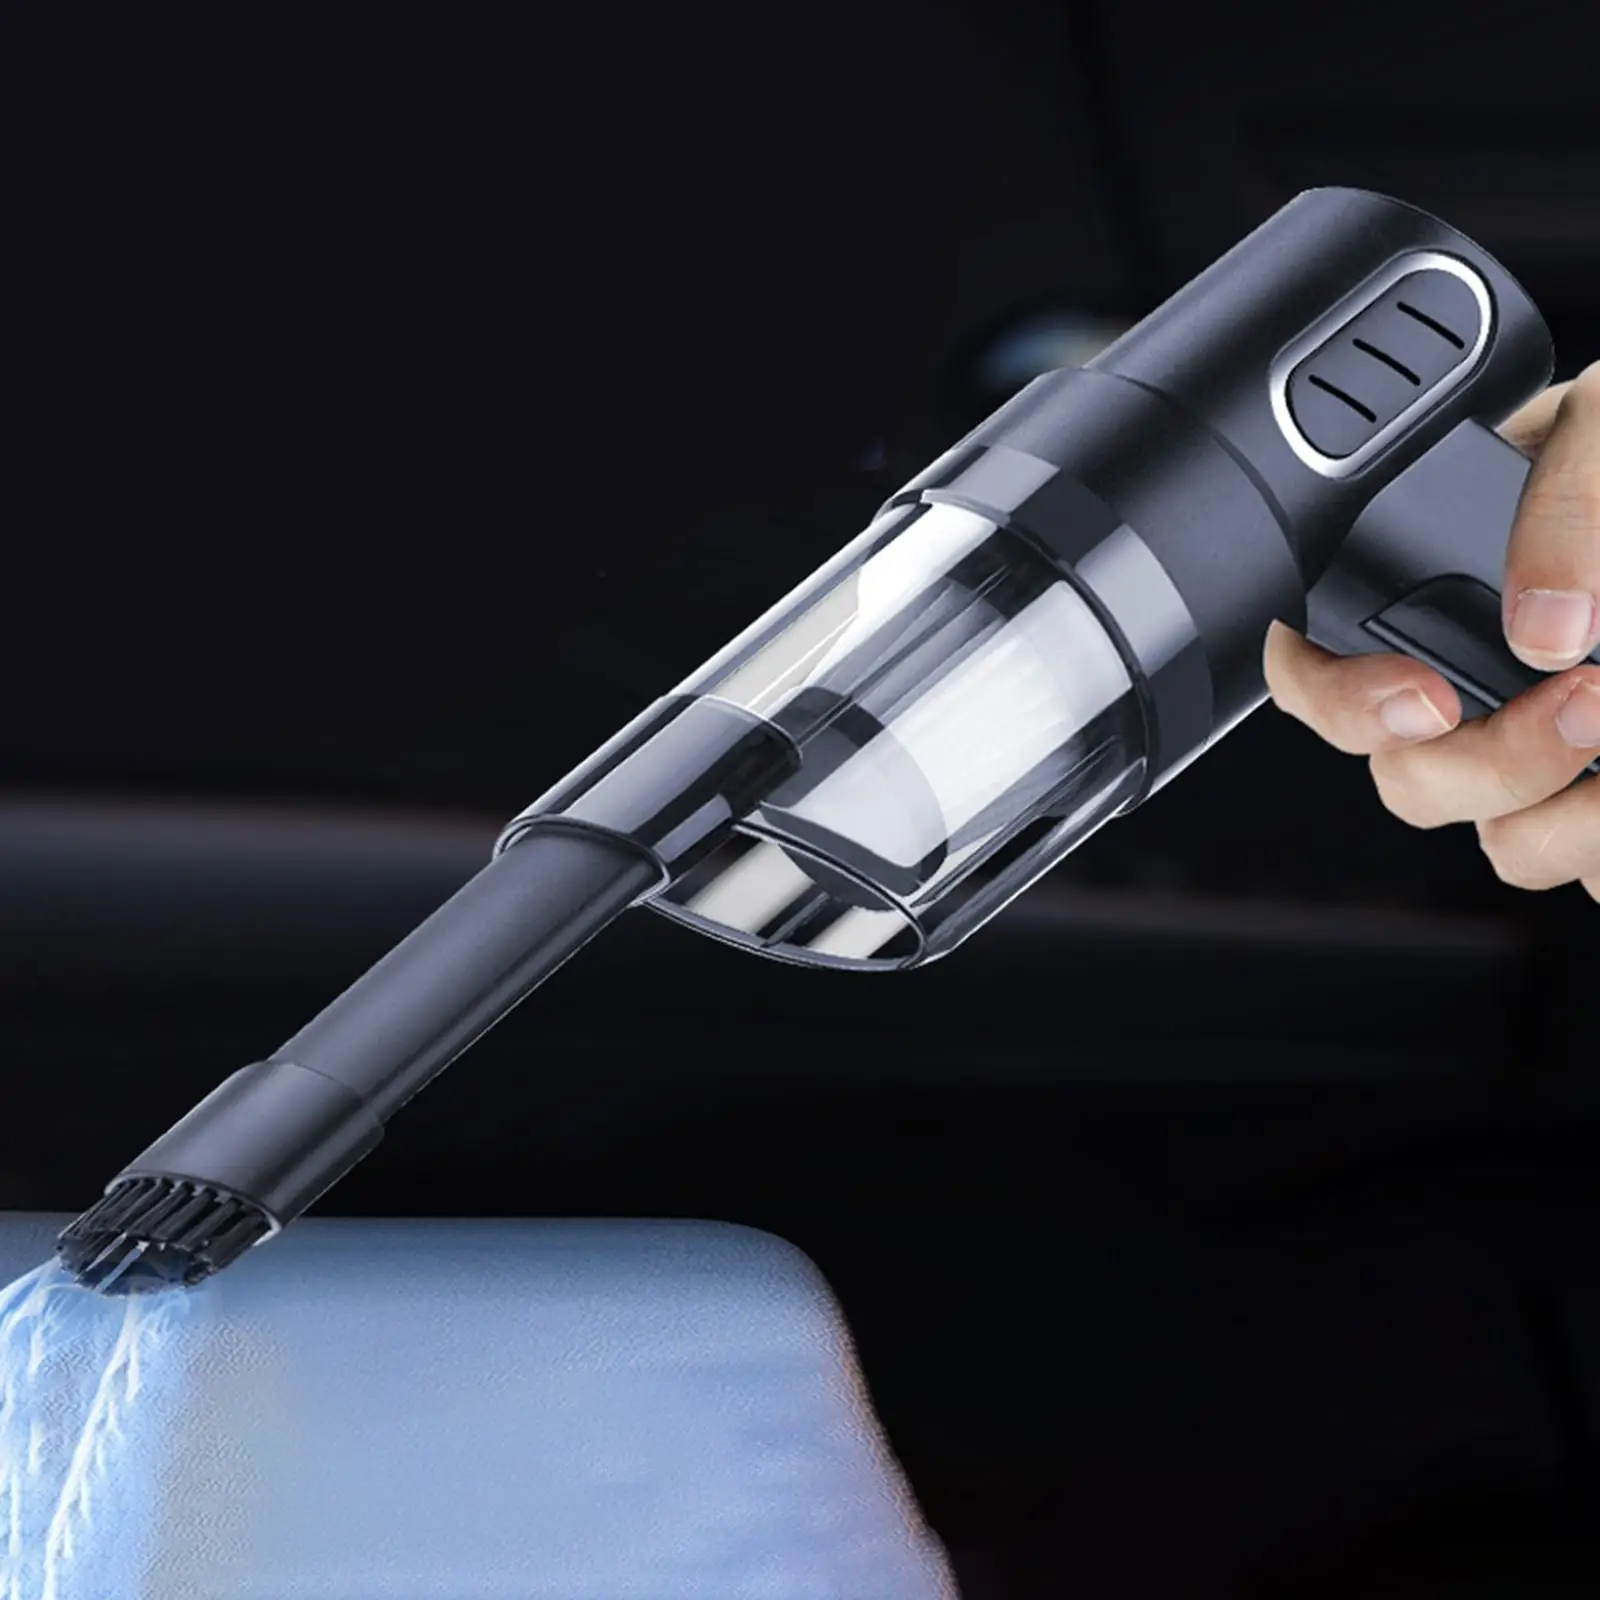 Car Vacuum Cleaner Powerful with Attachments HEPA Filter Small for Pet